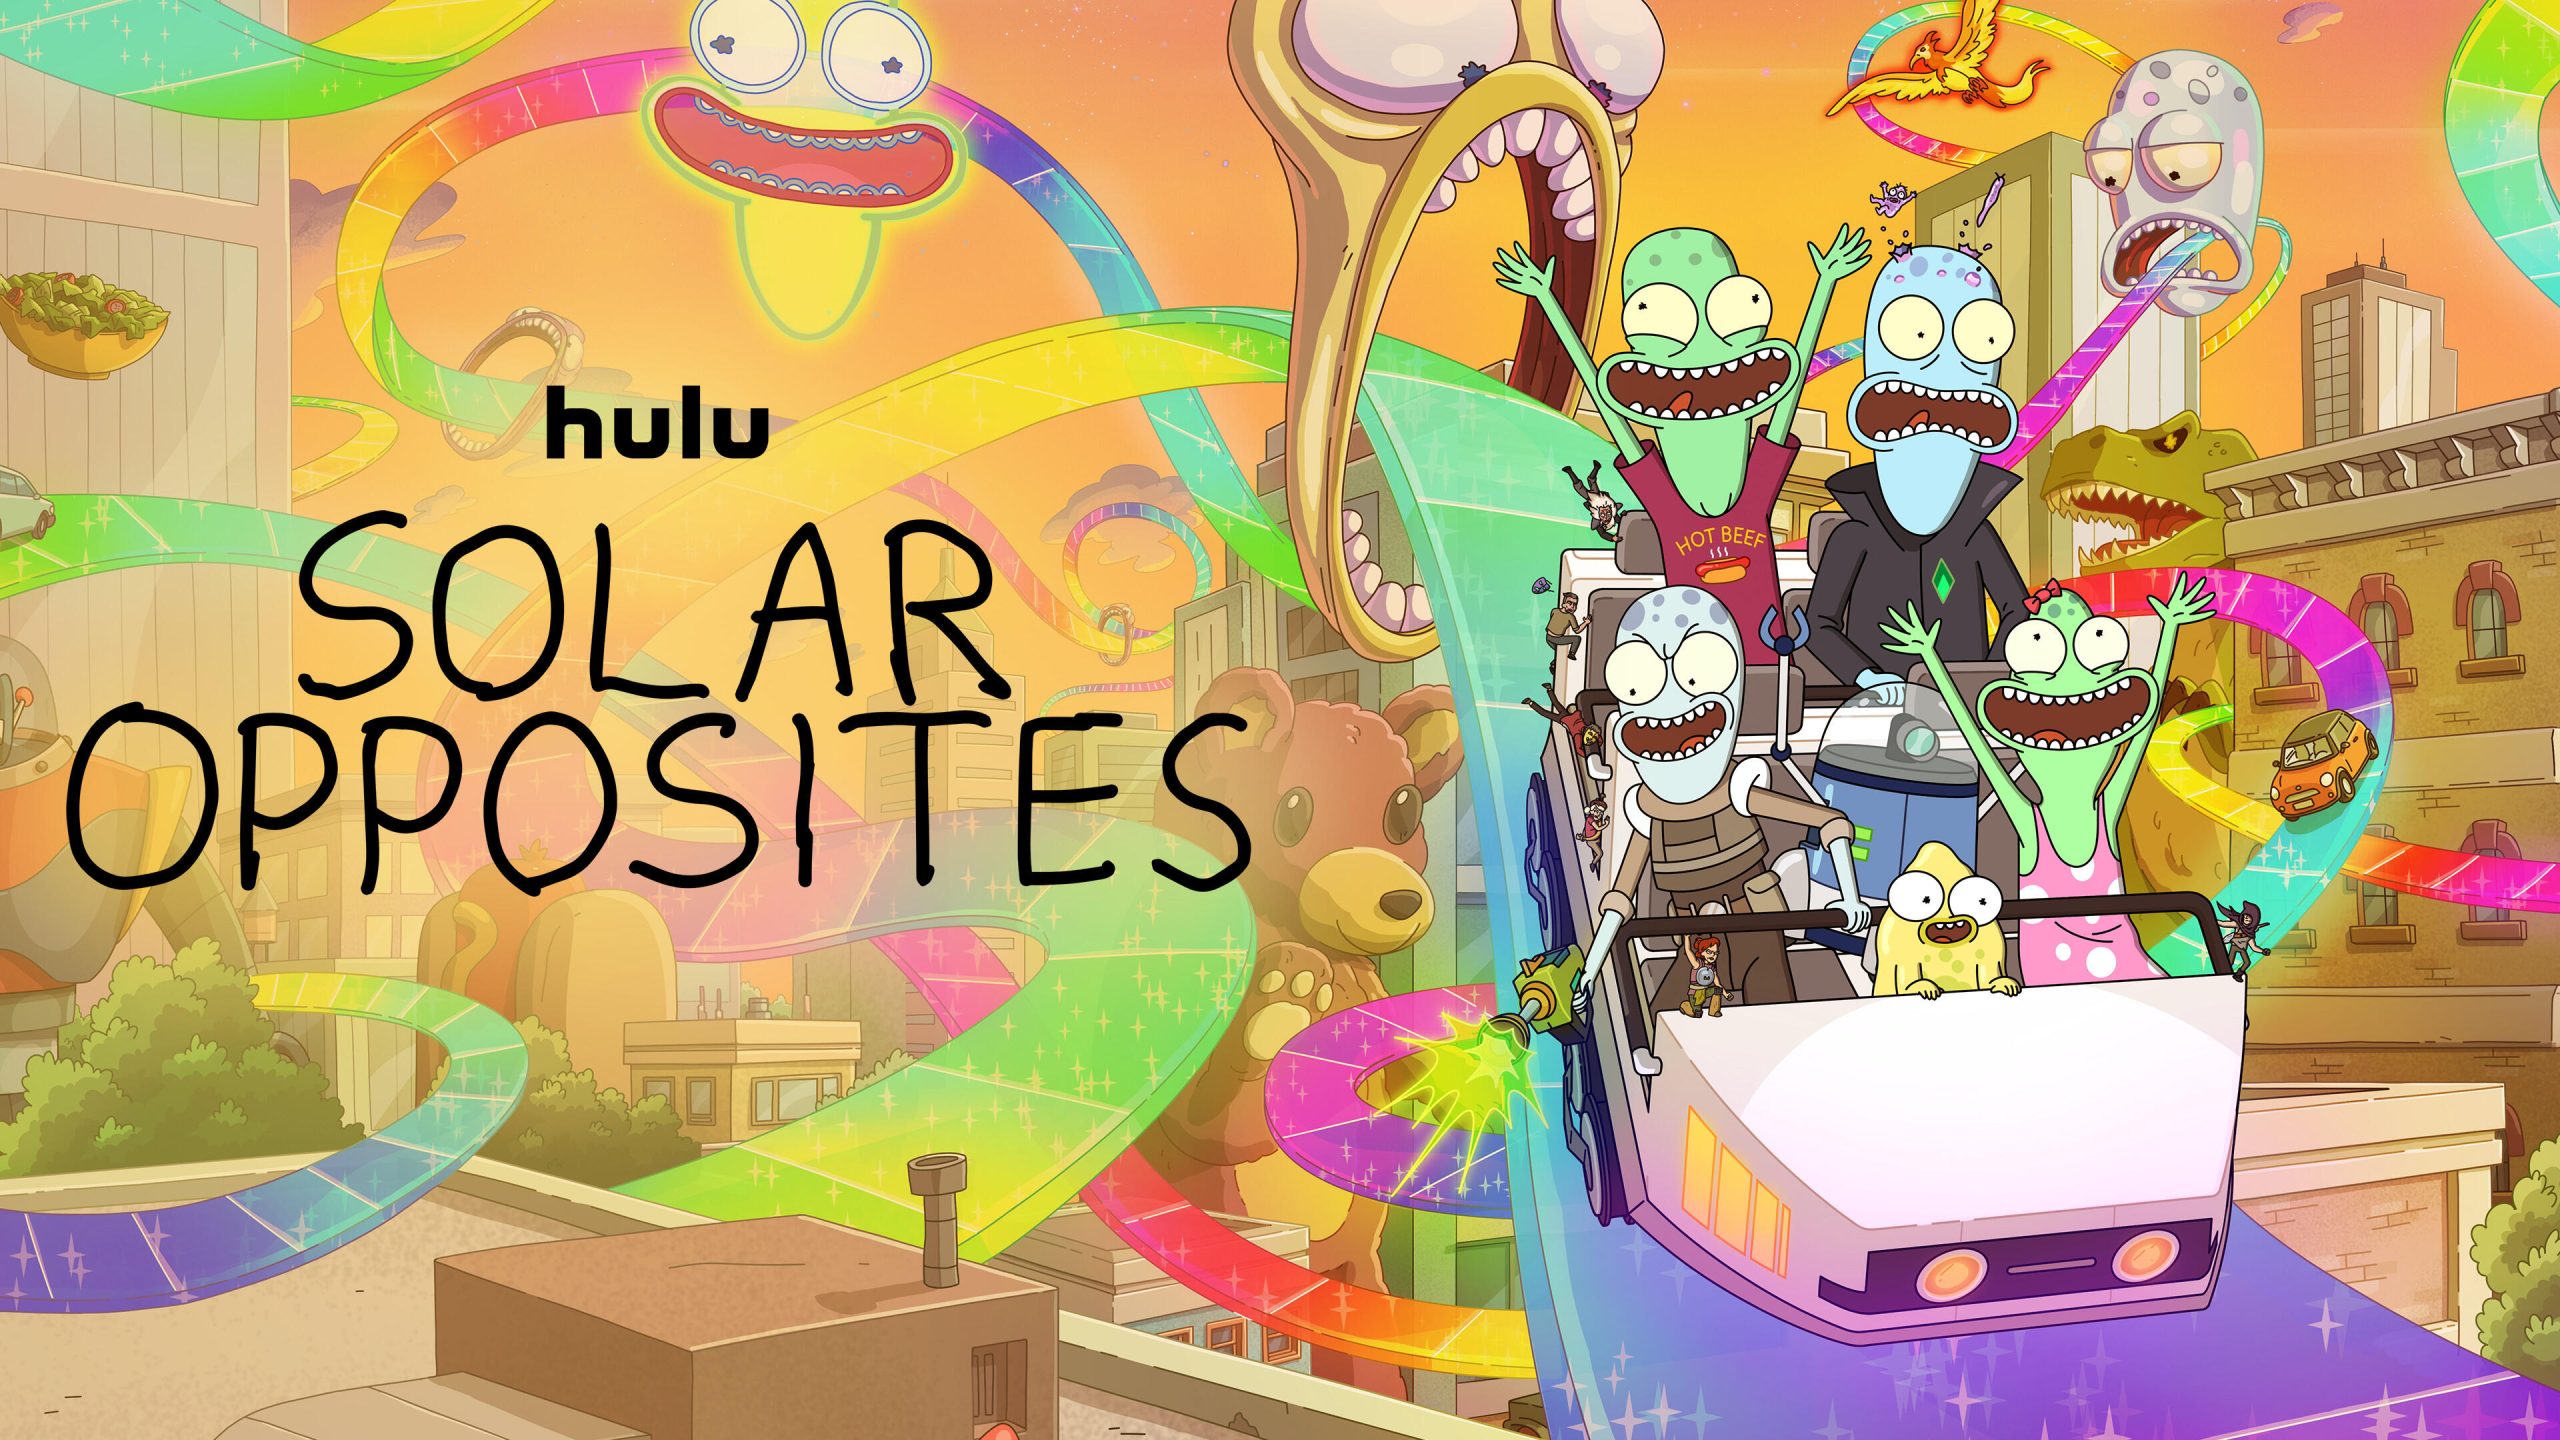 Solar Opposites -- Season 5 -- On season 5 of Solar Opposites, now that alien mission partners Terry and Korvo are married, the whole Solar Opposites team are focused on family values. (Courtesy of Disney)